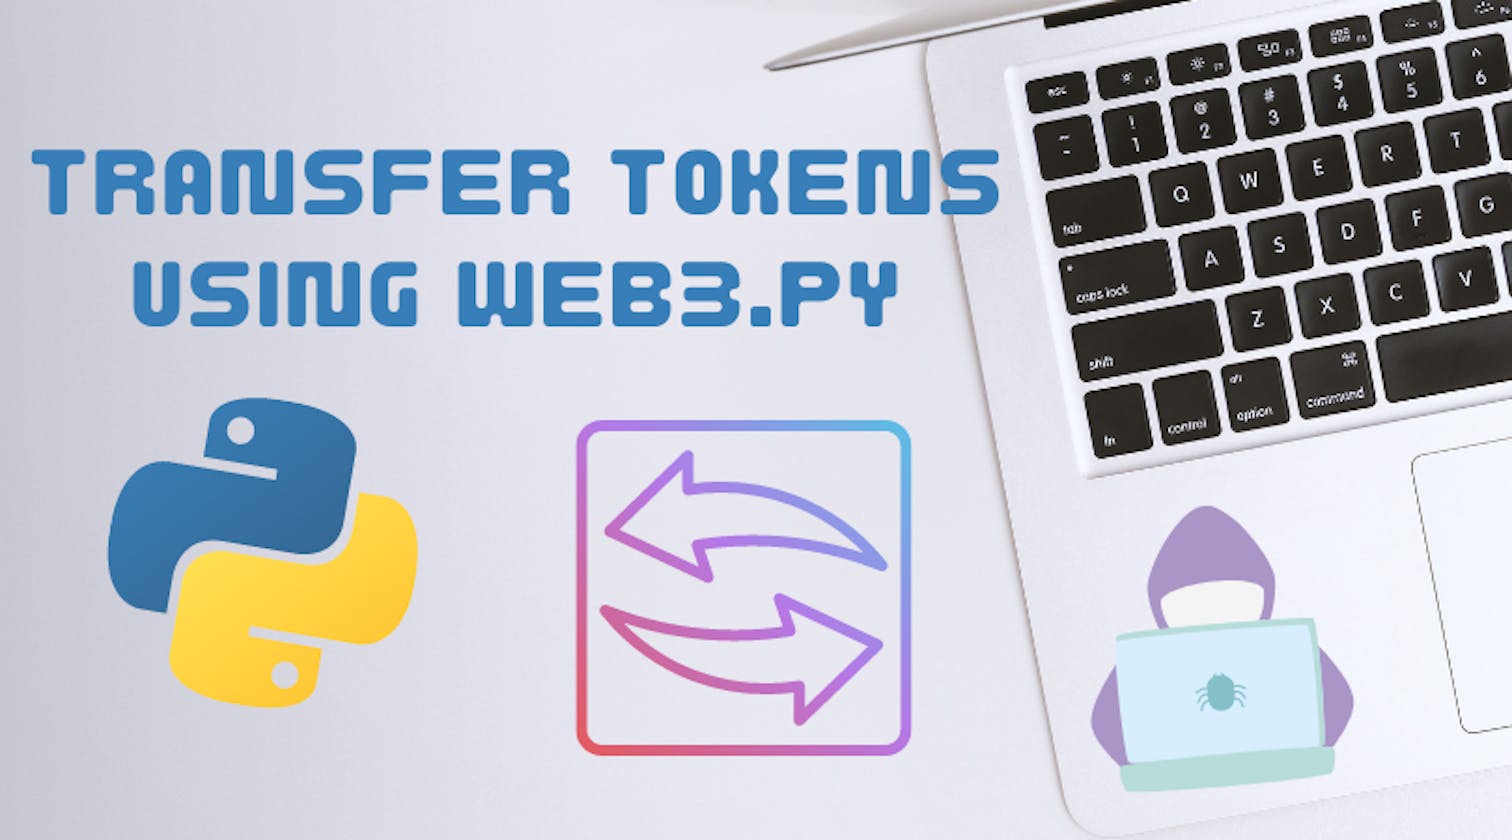 Transfer tokens between accounts using web3.py